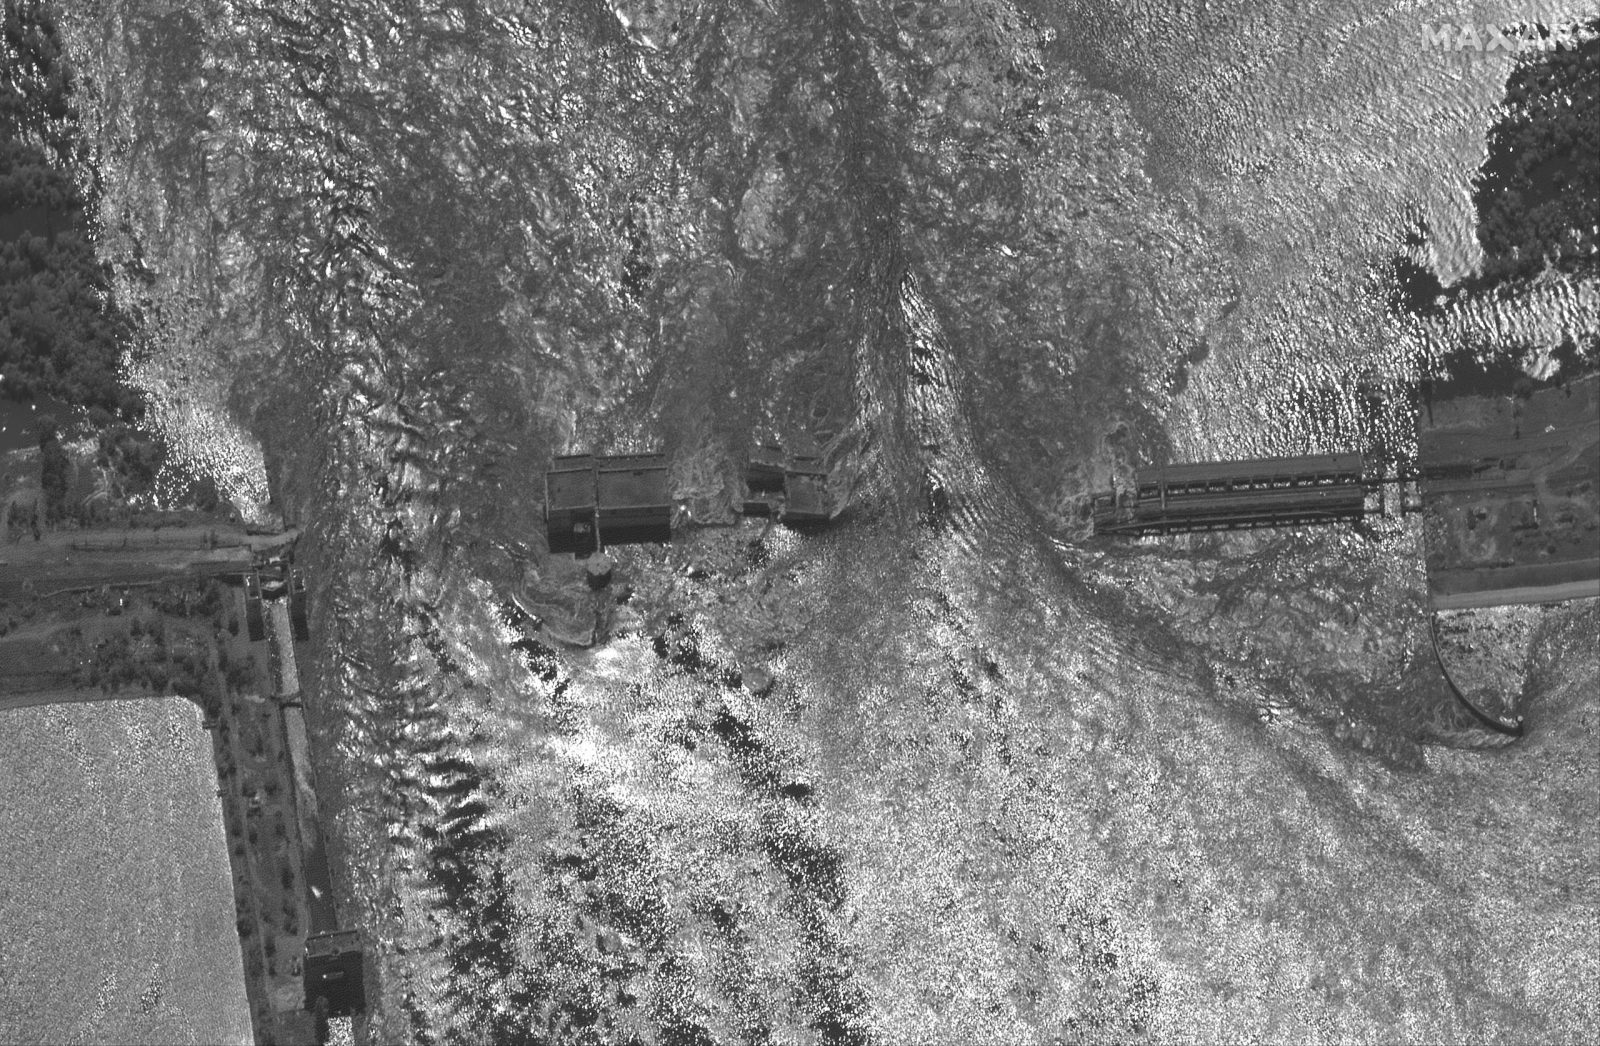 epa10676608 A handout satellite image made available by Maxar Technologies shows a closer view of the destroyed Nova Kakhovka dam and hydroelectric plant in the Kherson region, southern Ukraine, 06 June 2023. Ukraine has accused Russian forces of destroying a critical dam and hydroelectric power plant on the Dnipro River in the Kherson region along the front line in southern Ukraine on 06 June. A number of settlements were completely or partially flooded, Kherson region governor Oleksandr Prokudin said on telegram. Russian troops entered Ukraine on 24 February 2022 starting a conflict that has provoked destruction and a humanitarian crisis.  EPA/MAXAR TECHNOLOGIES HANDOUT -- MANDATORY CREDIT: SATELLITE IMAGE 2023 MAXAR TECHNOLOGIES -- THE WATERMARK MAY NOT BE REMOVED/CROPPED -- HANDOUT EDITORIAL USE ONLY/NO SALES